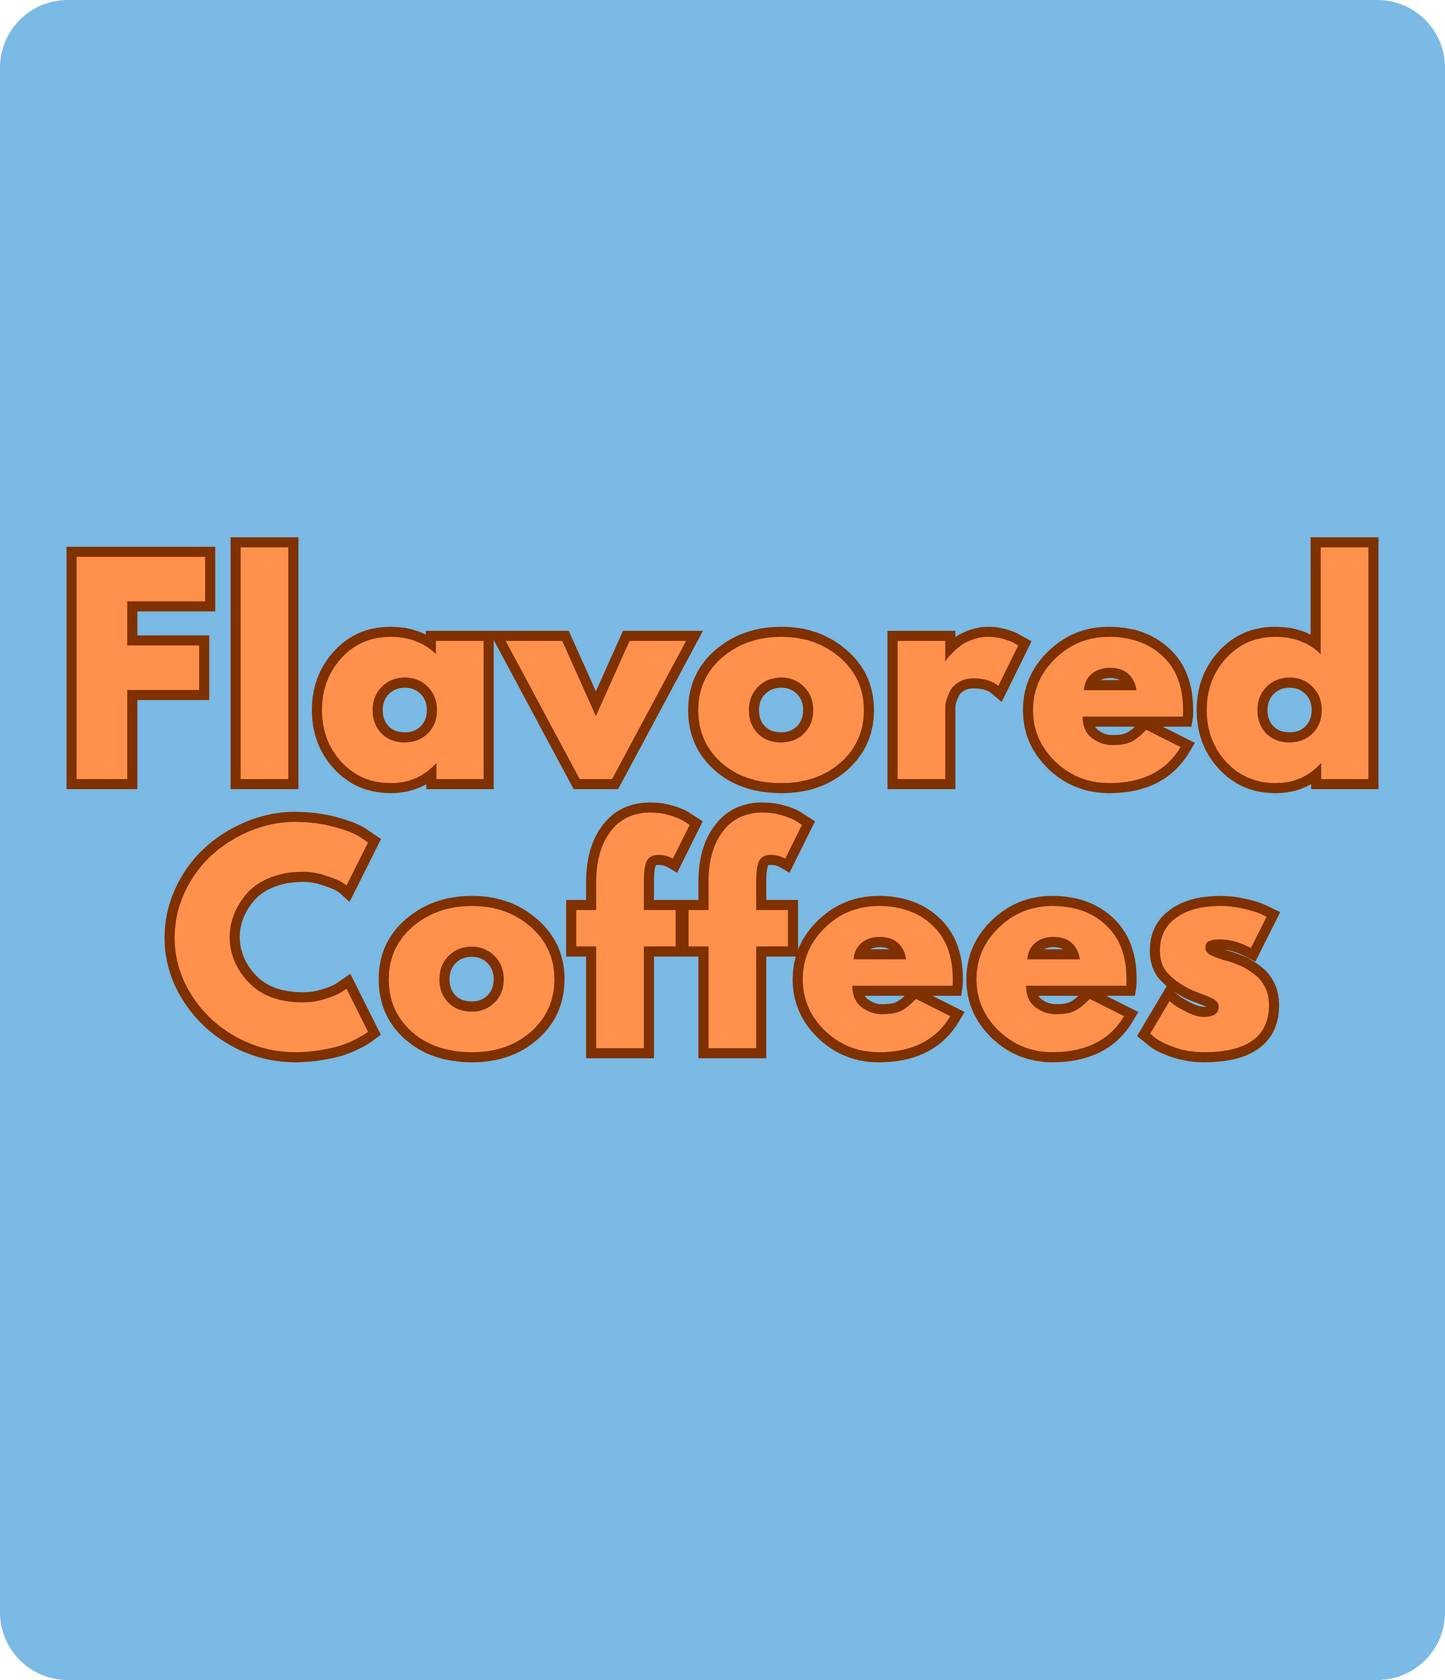 Flavored Coffees